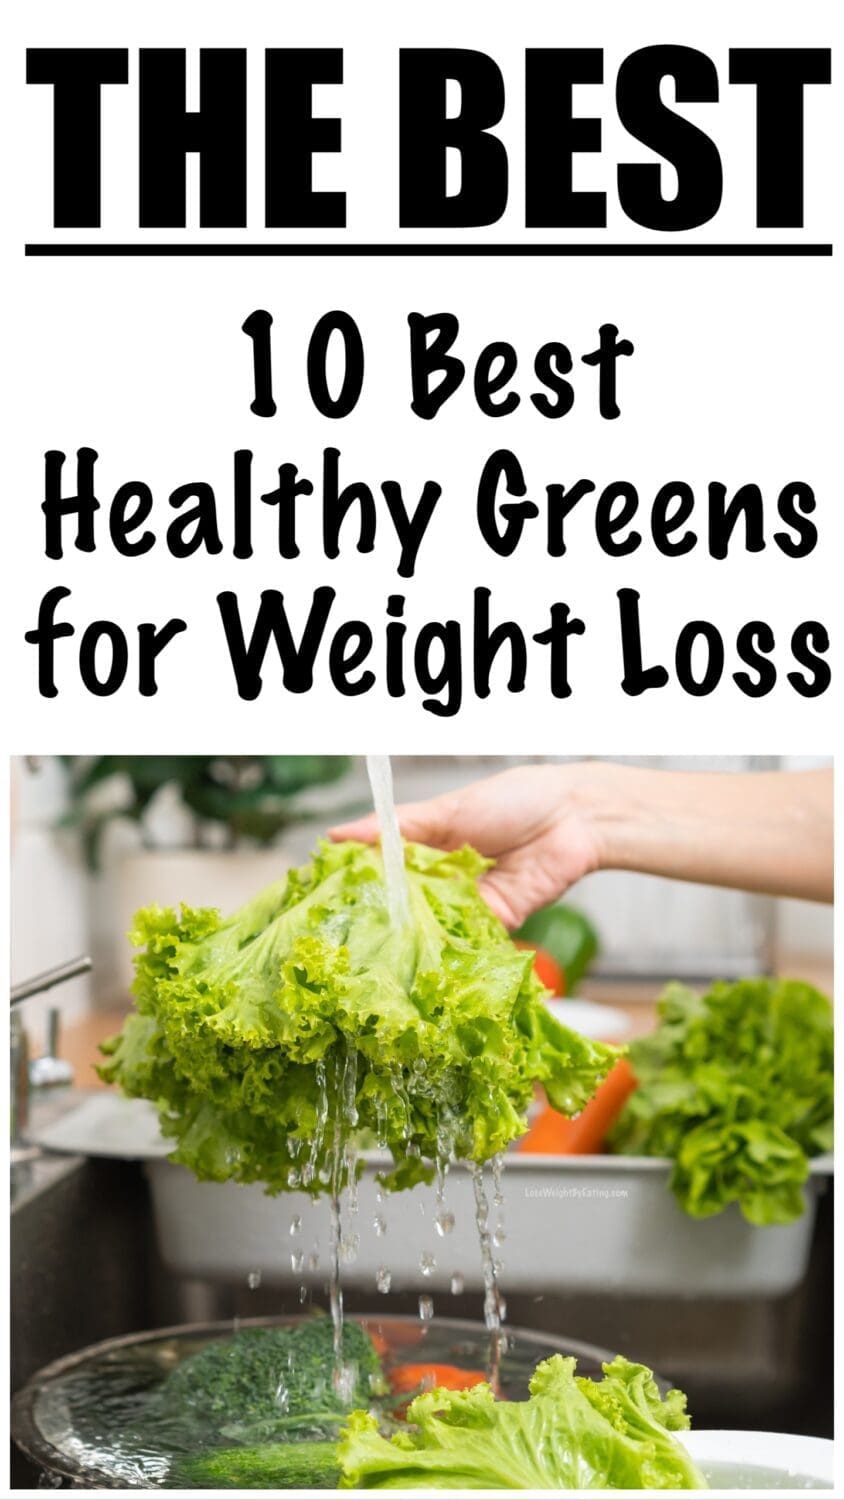 10 Best Healthy Greens for Weight Loss